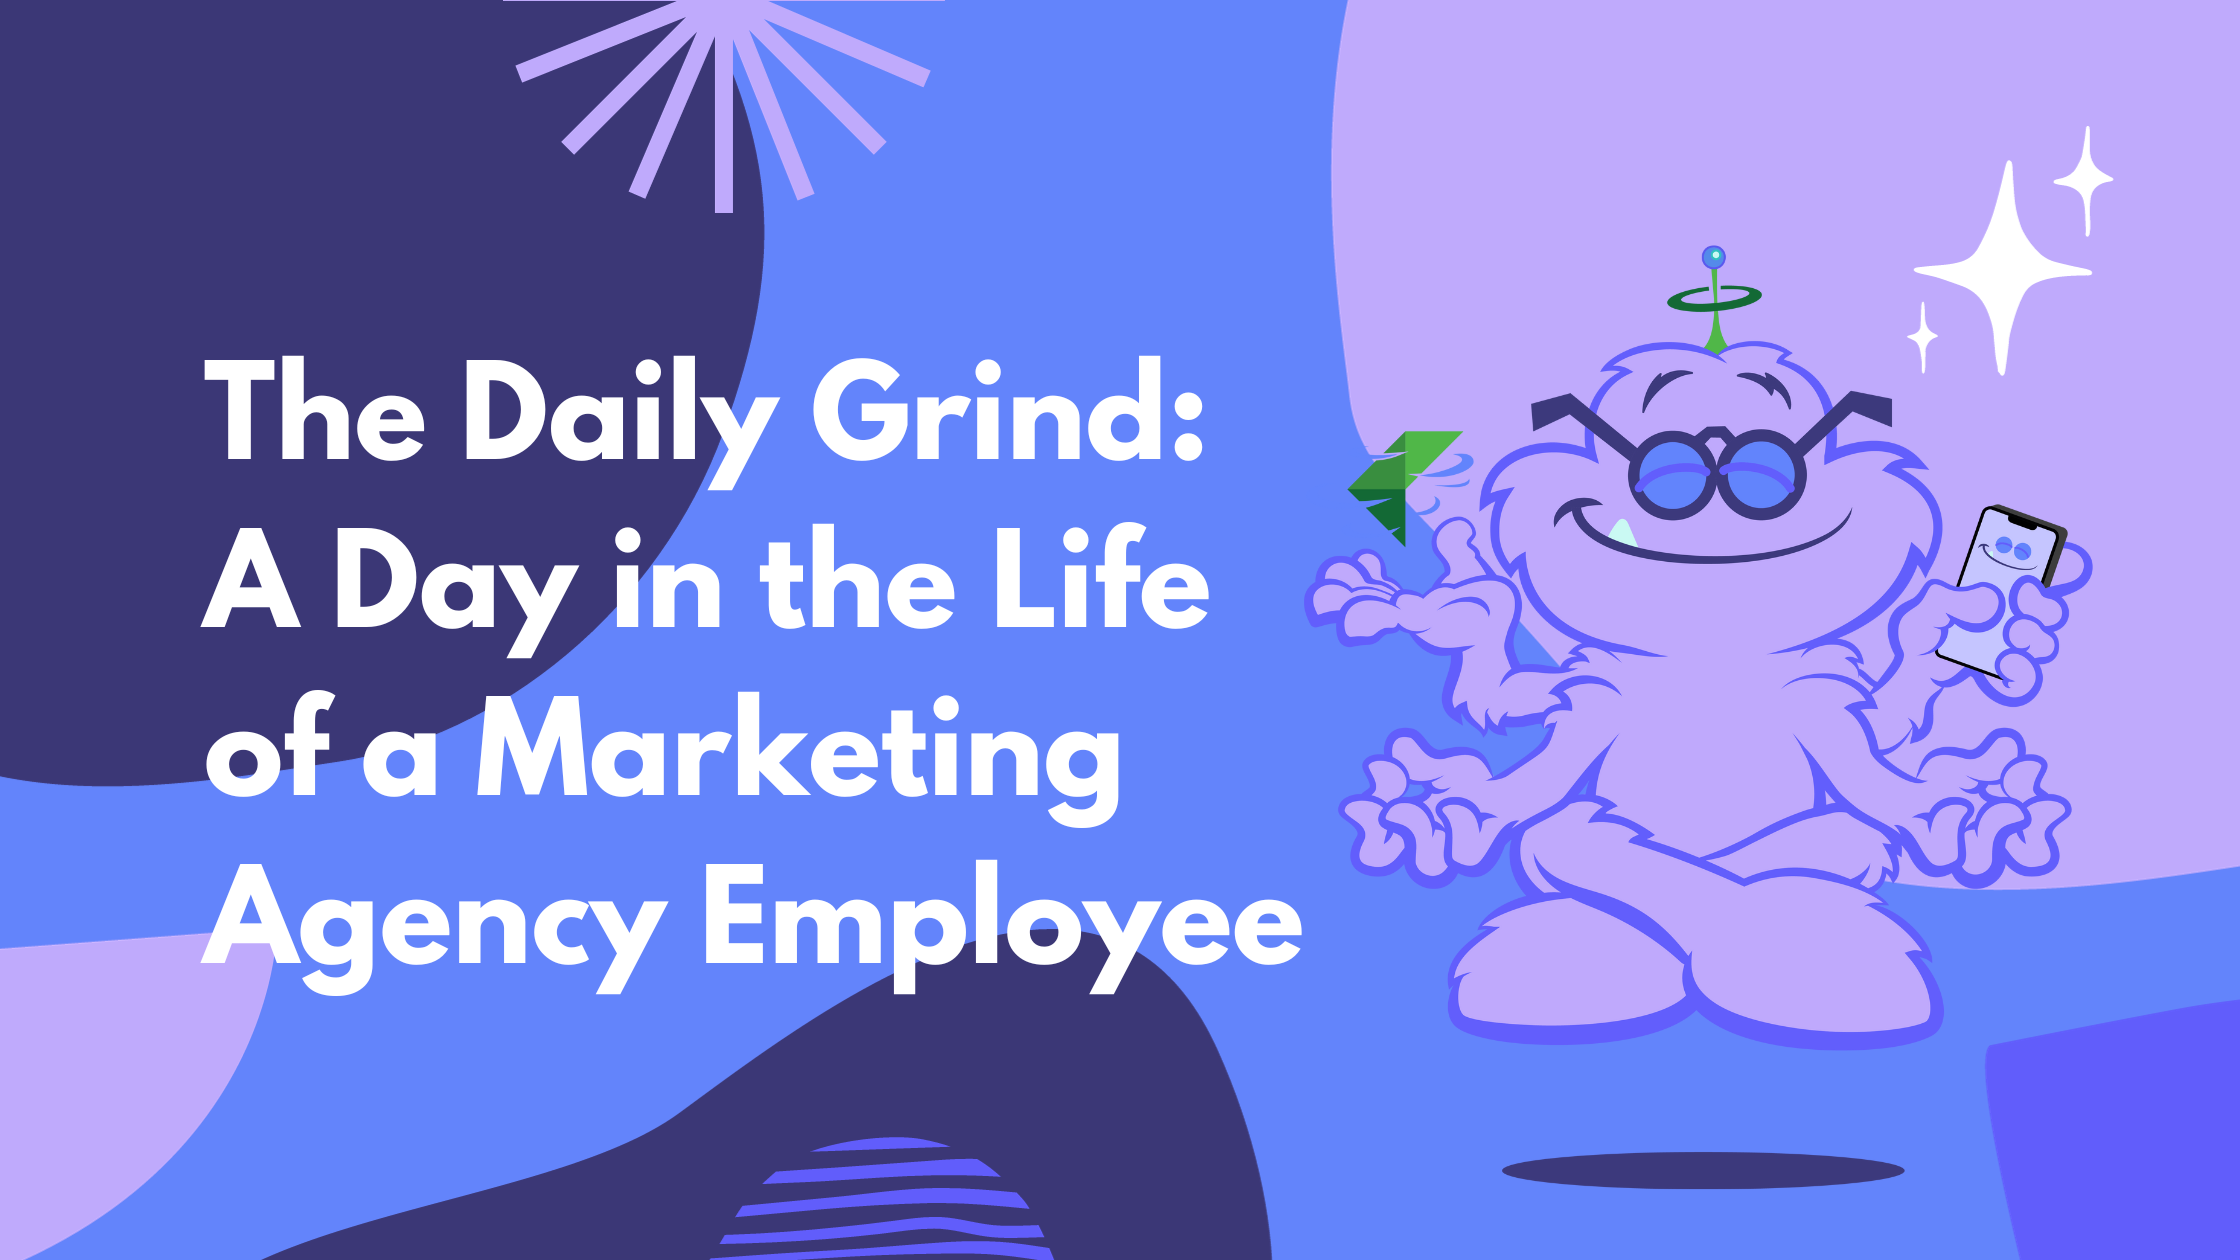 The Daily Grind: A Day in the Life of a Marketing Agency Employee